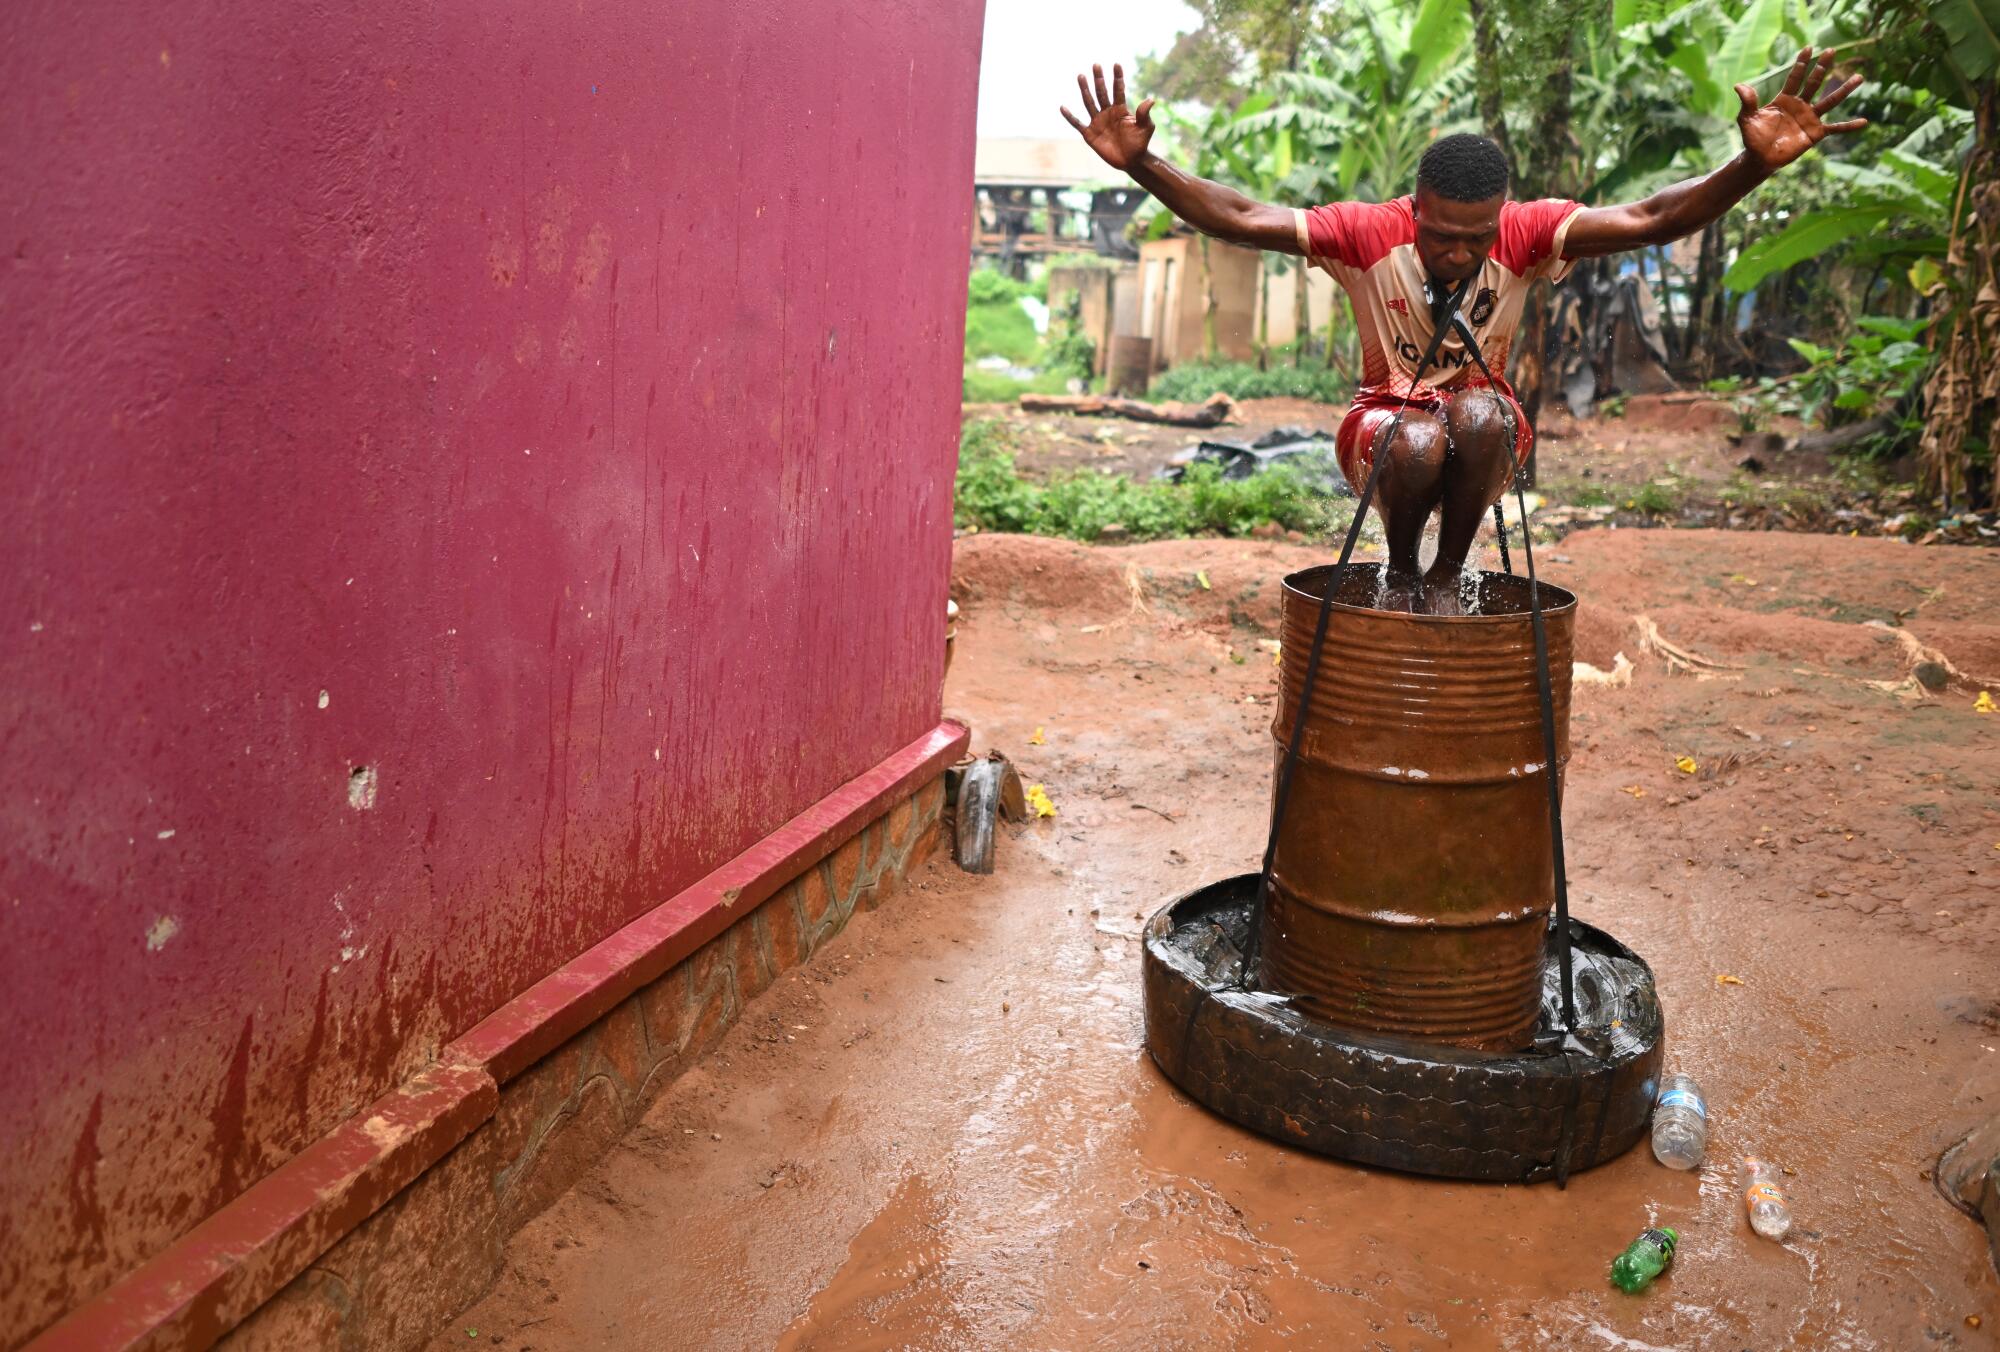 Dennis Kasumba jumps into a drum full of water to strengthen his legs outside his home in Uganda.